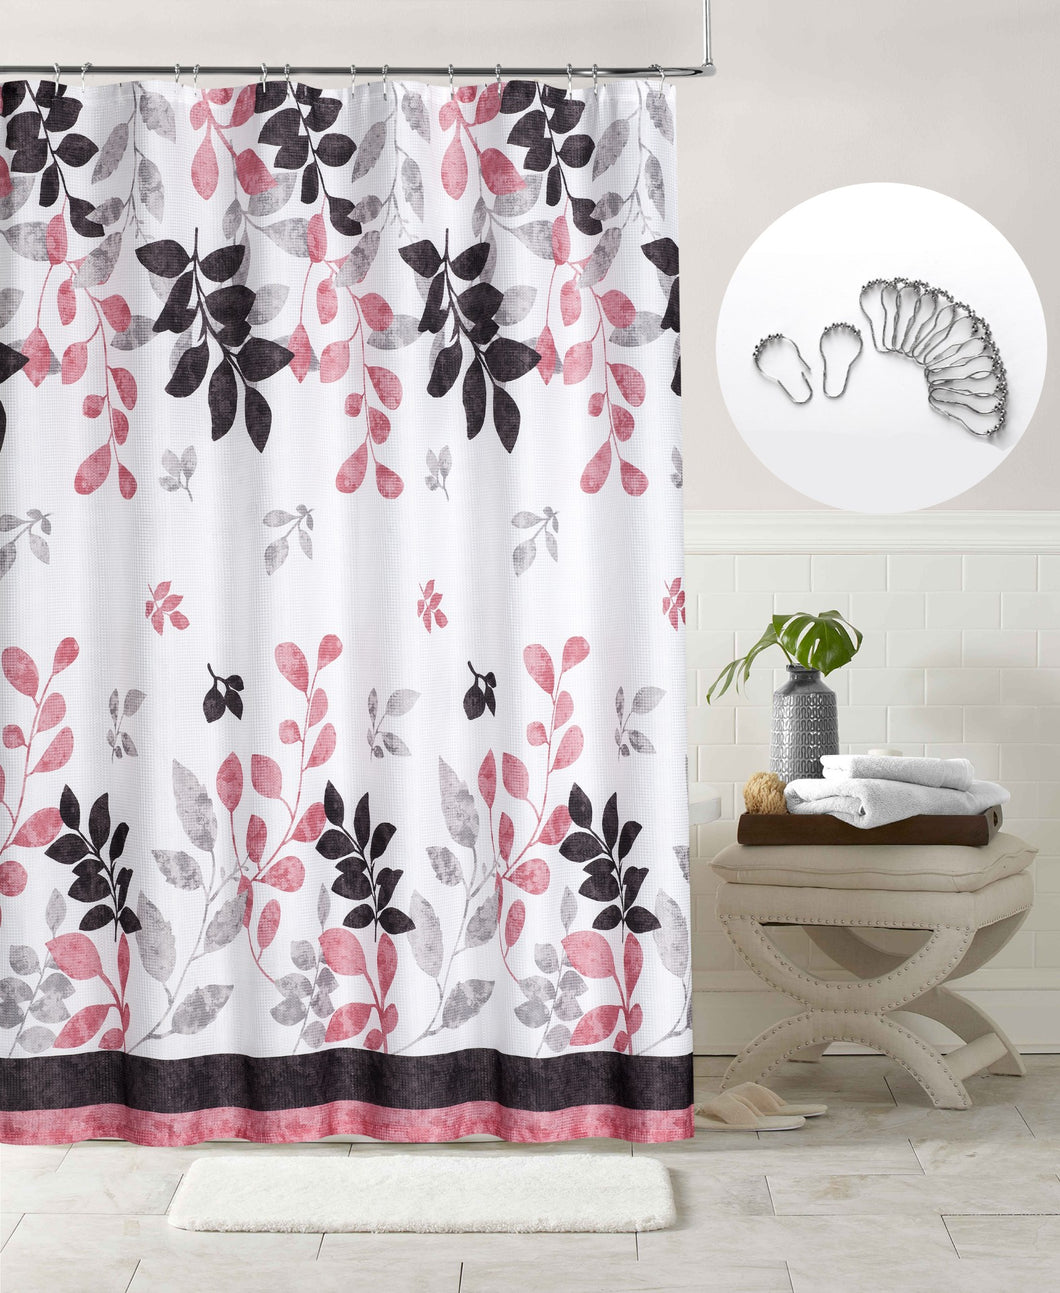 Dainty Home Printed Waffle 3D Textured Waffle Weave Leaves Designed Fabric Shower Curtain with 12 Roller Ball Hooks Included 70